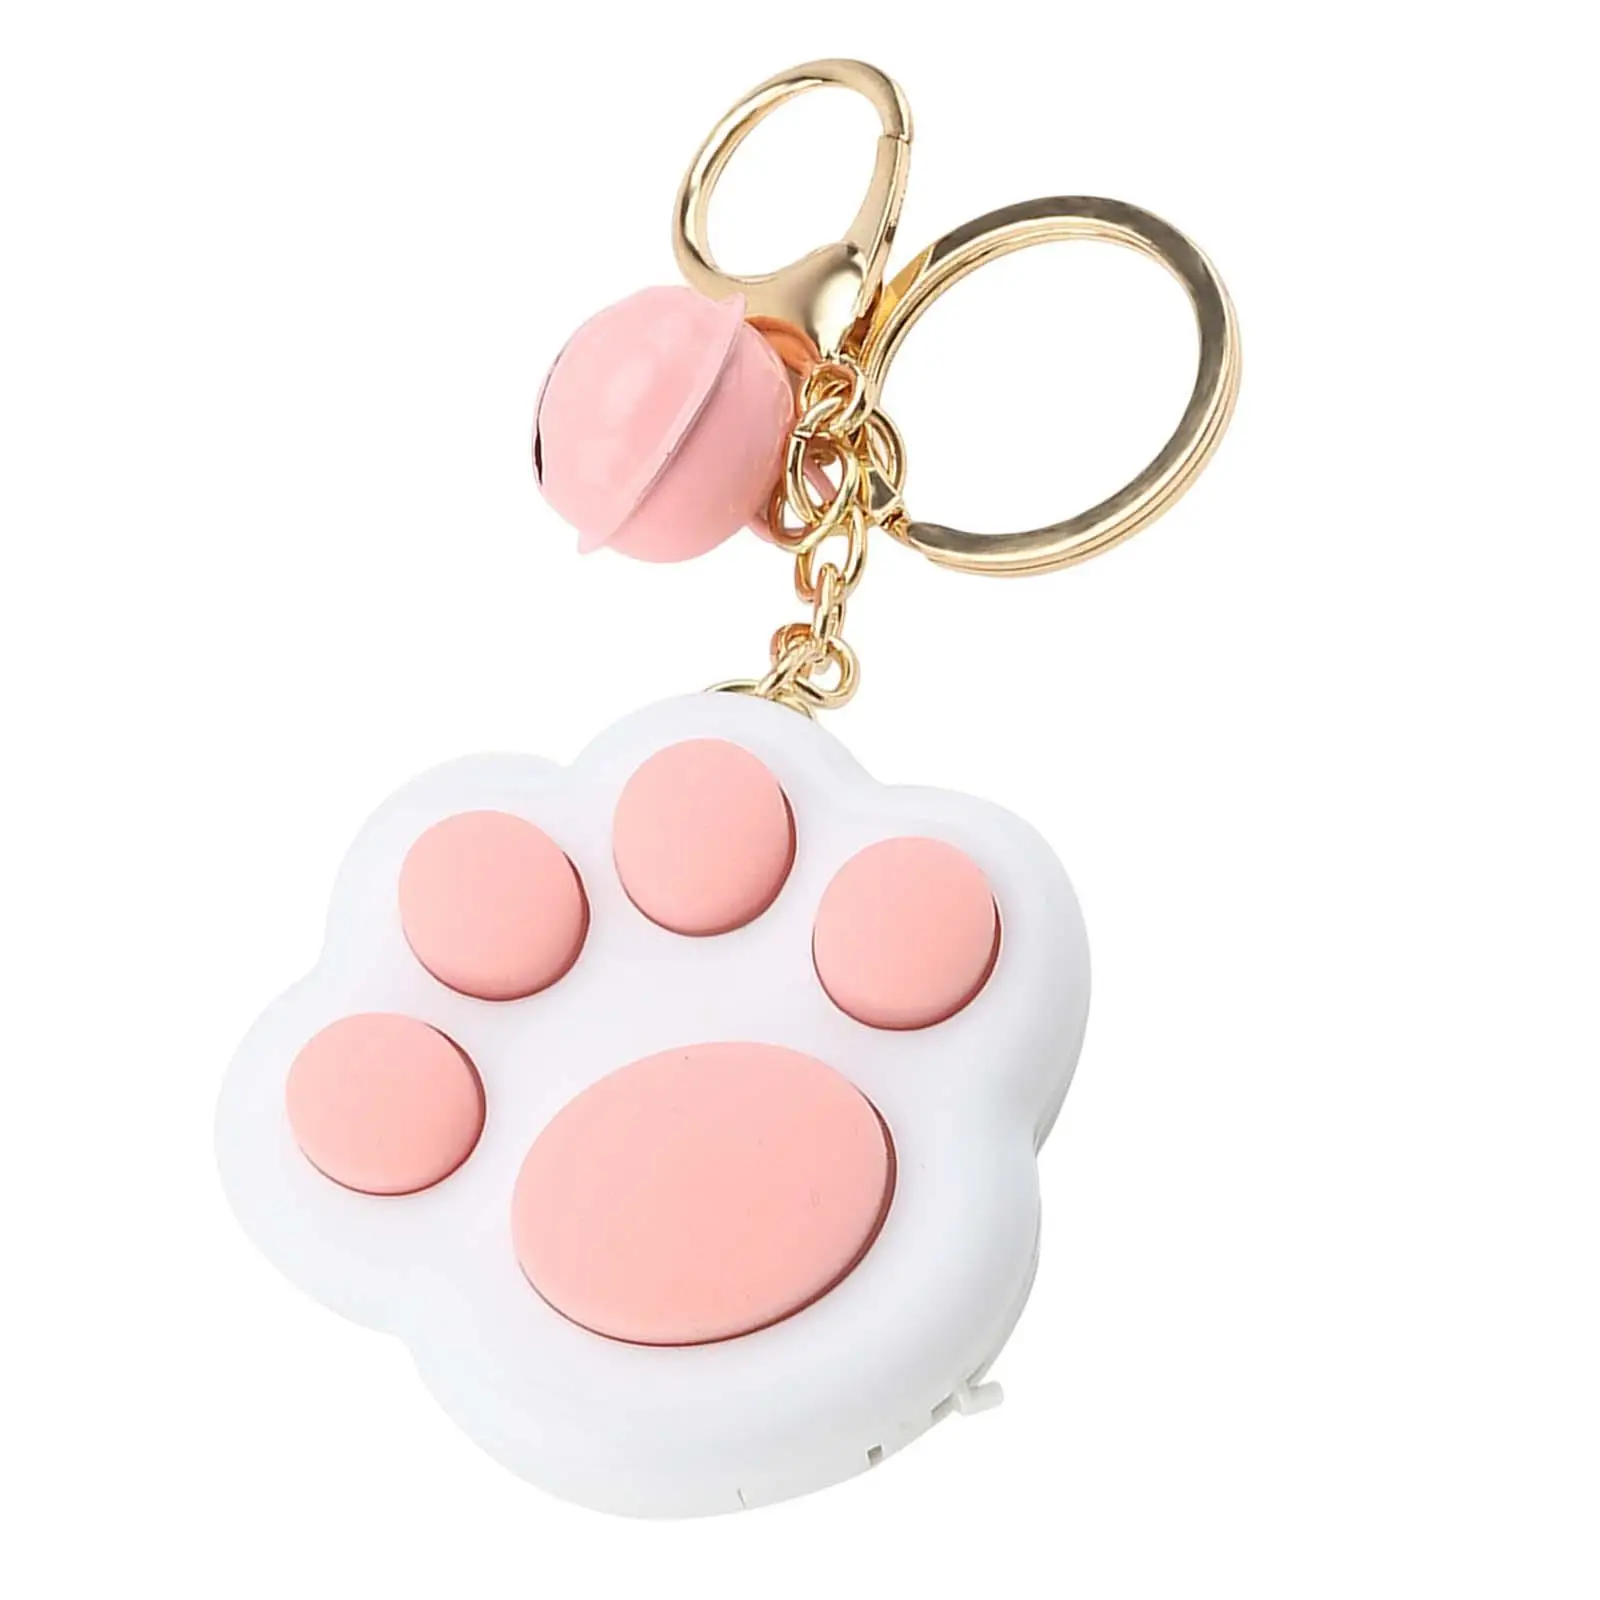 Keychain Exquisite Mini Lightweight Memory training rings Novelty Gifts